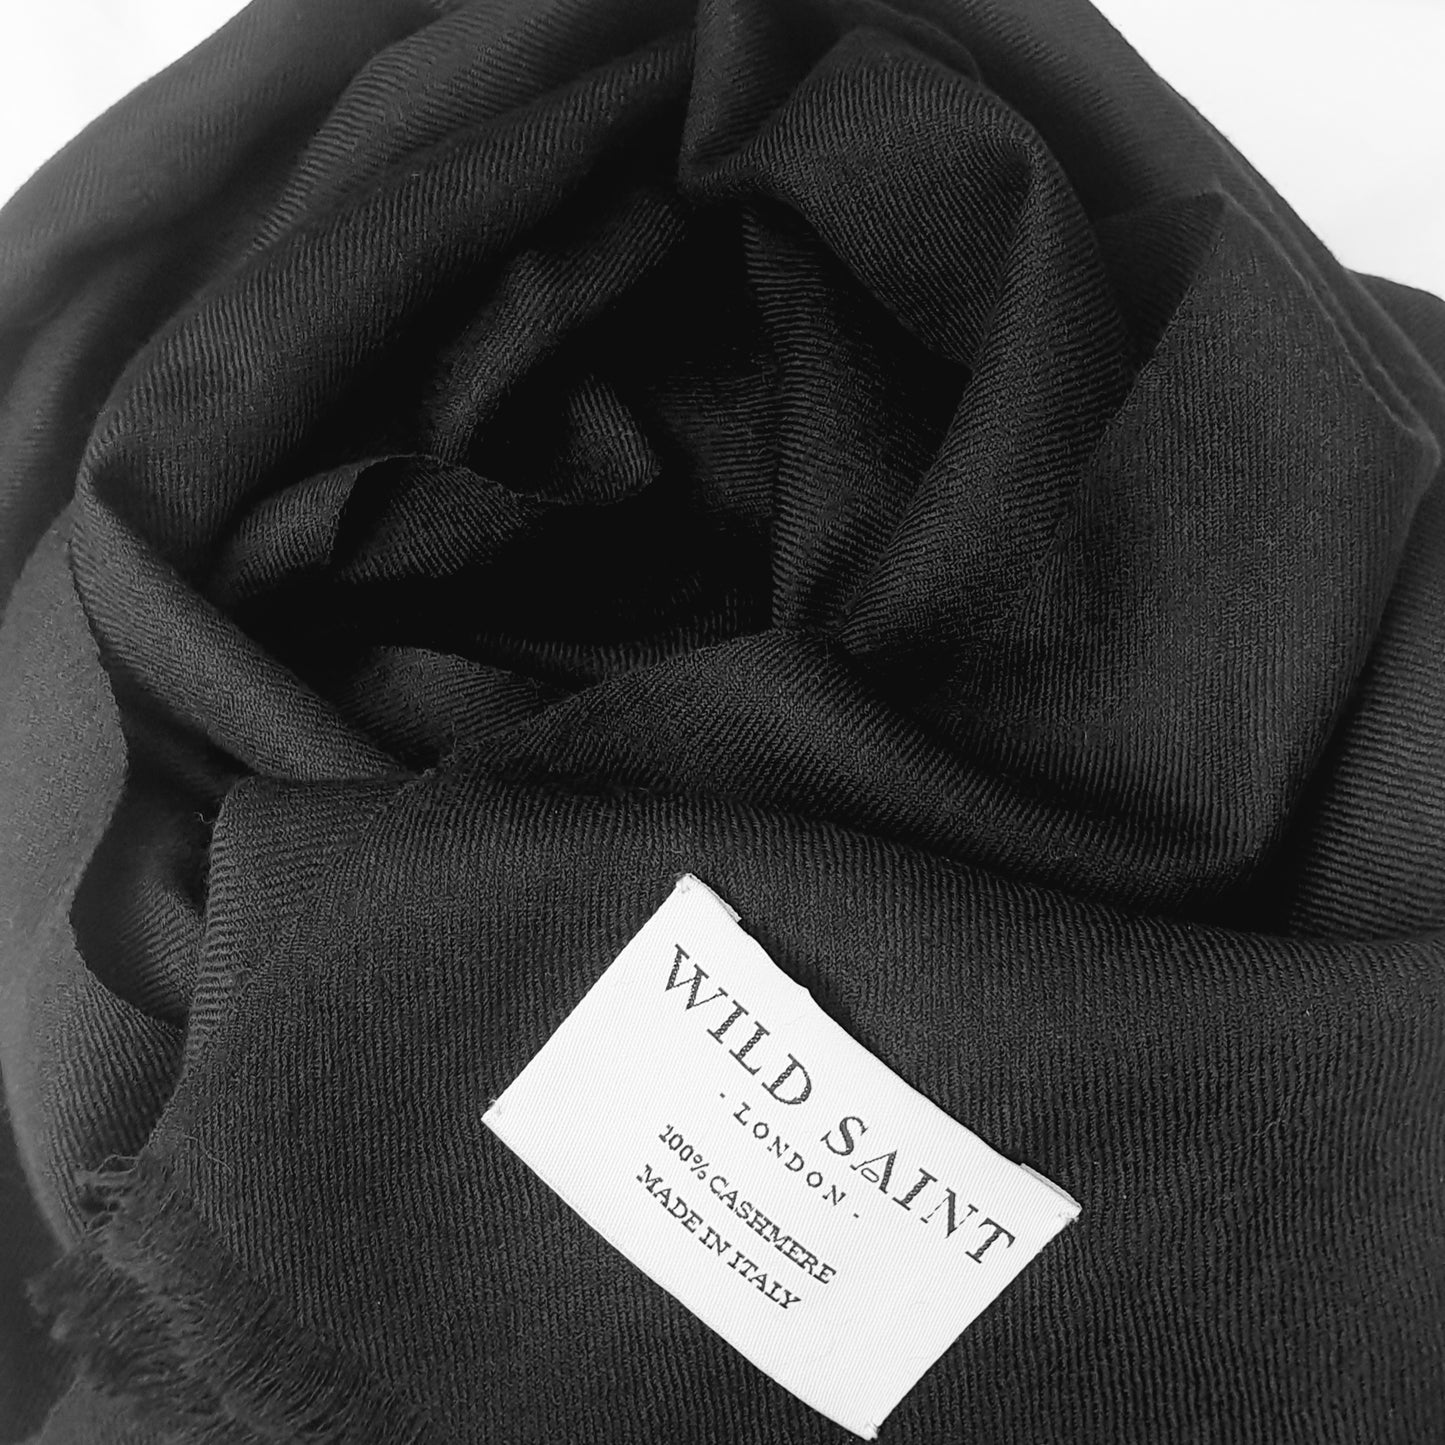 Black lightweight 100% cashmere scarf for women and men. Includes complimentary personlisation. Luxury cashmere scarves made in Italy